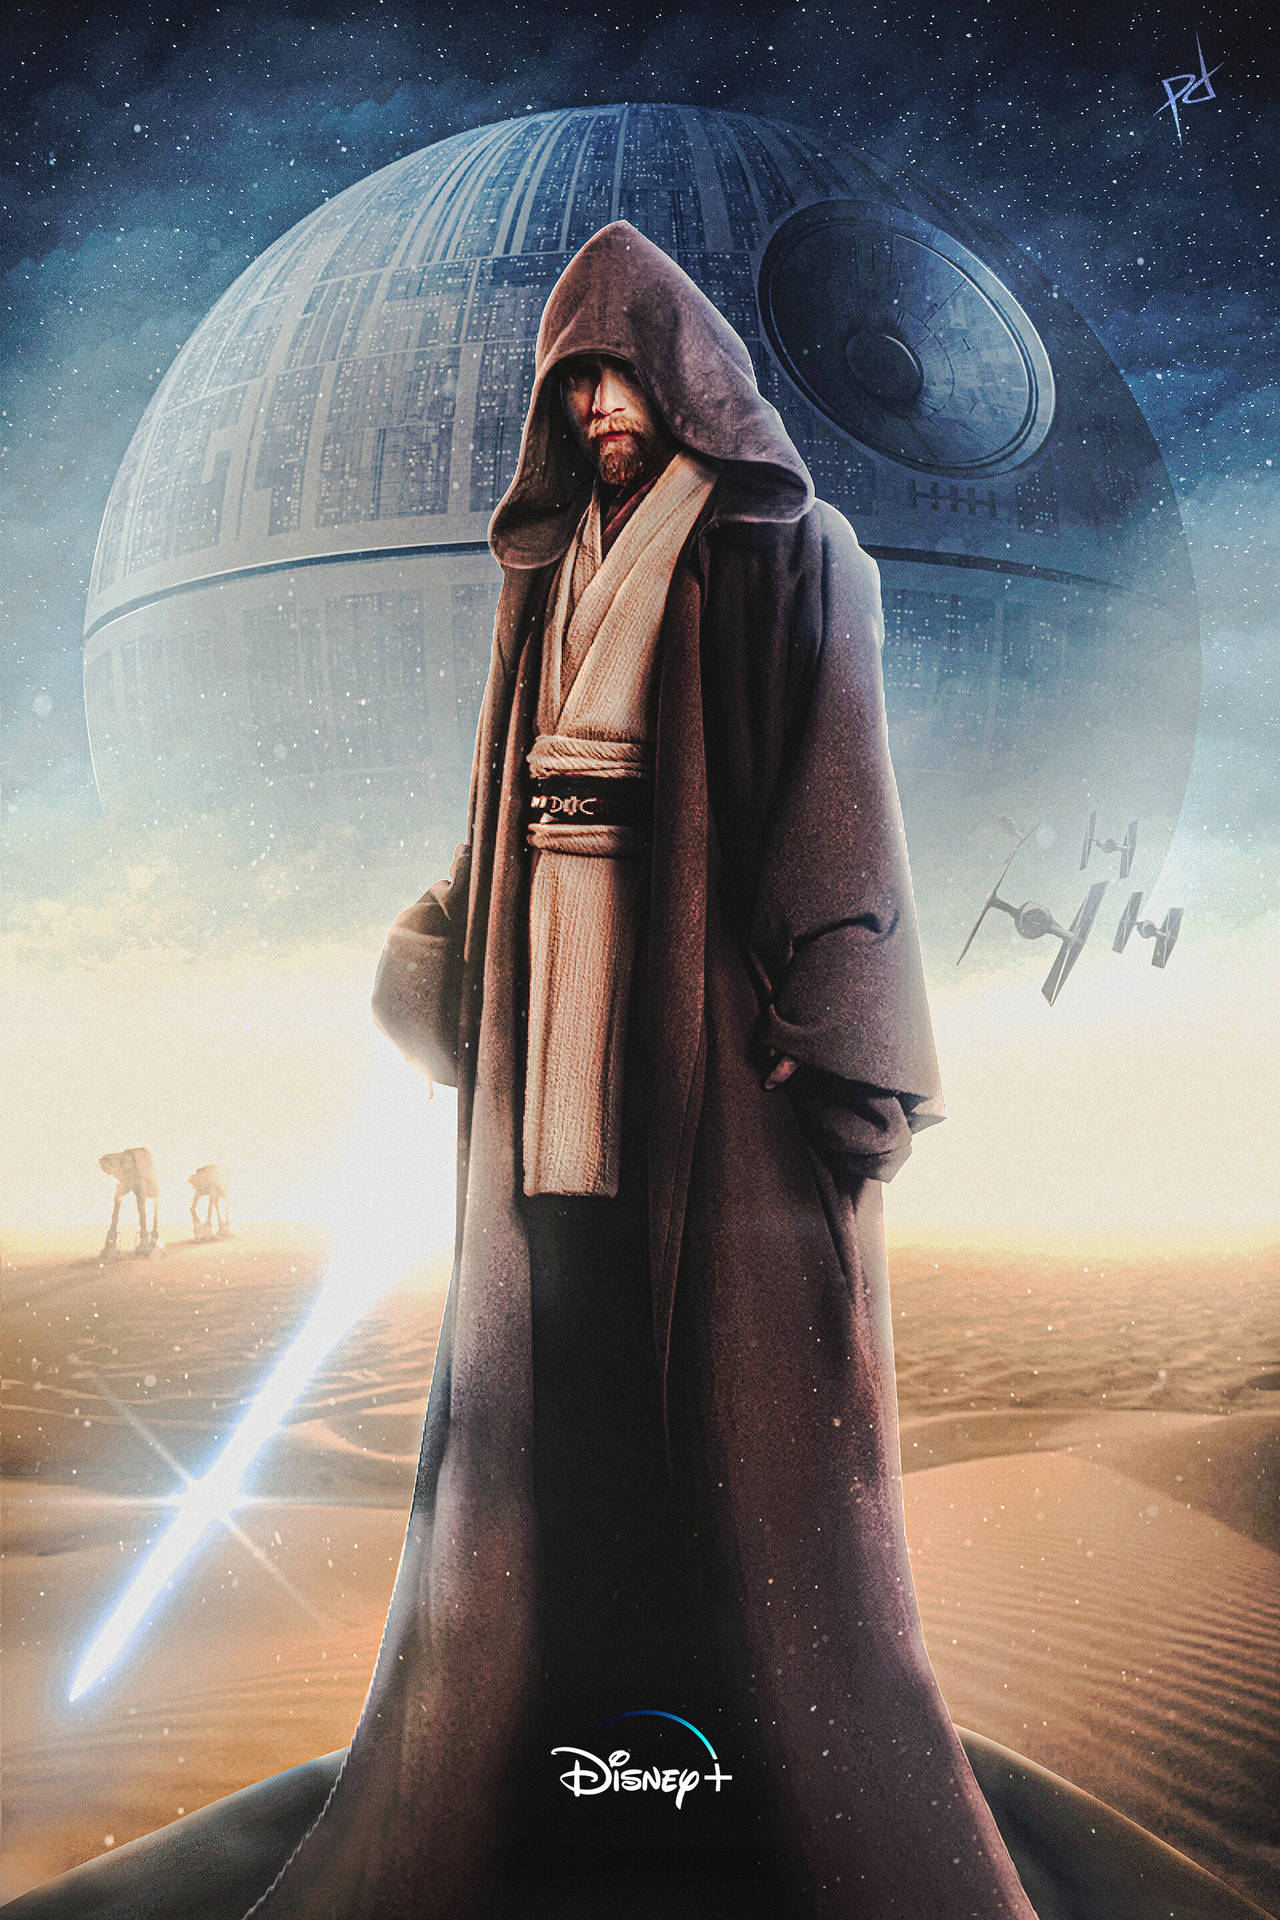 Made an iPhone wallpaper out of this ObiWan Kenobi 2022 poster since I  couldnt find one online  riphonewallpapers